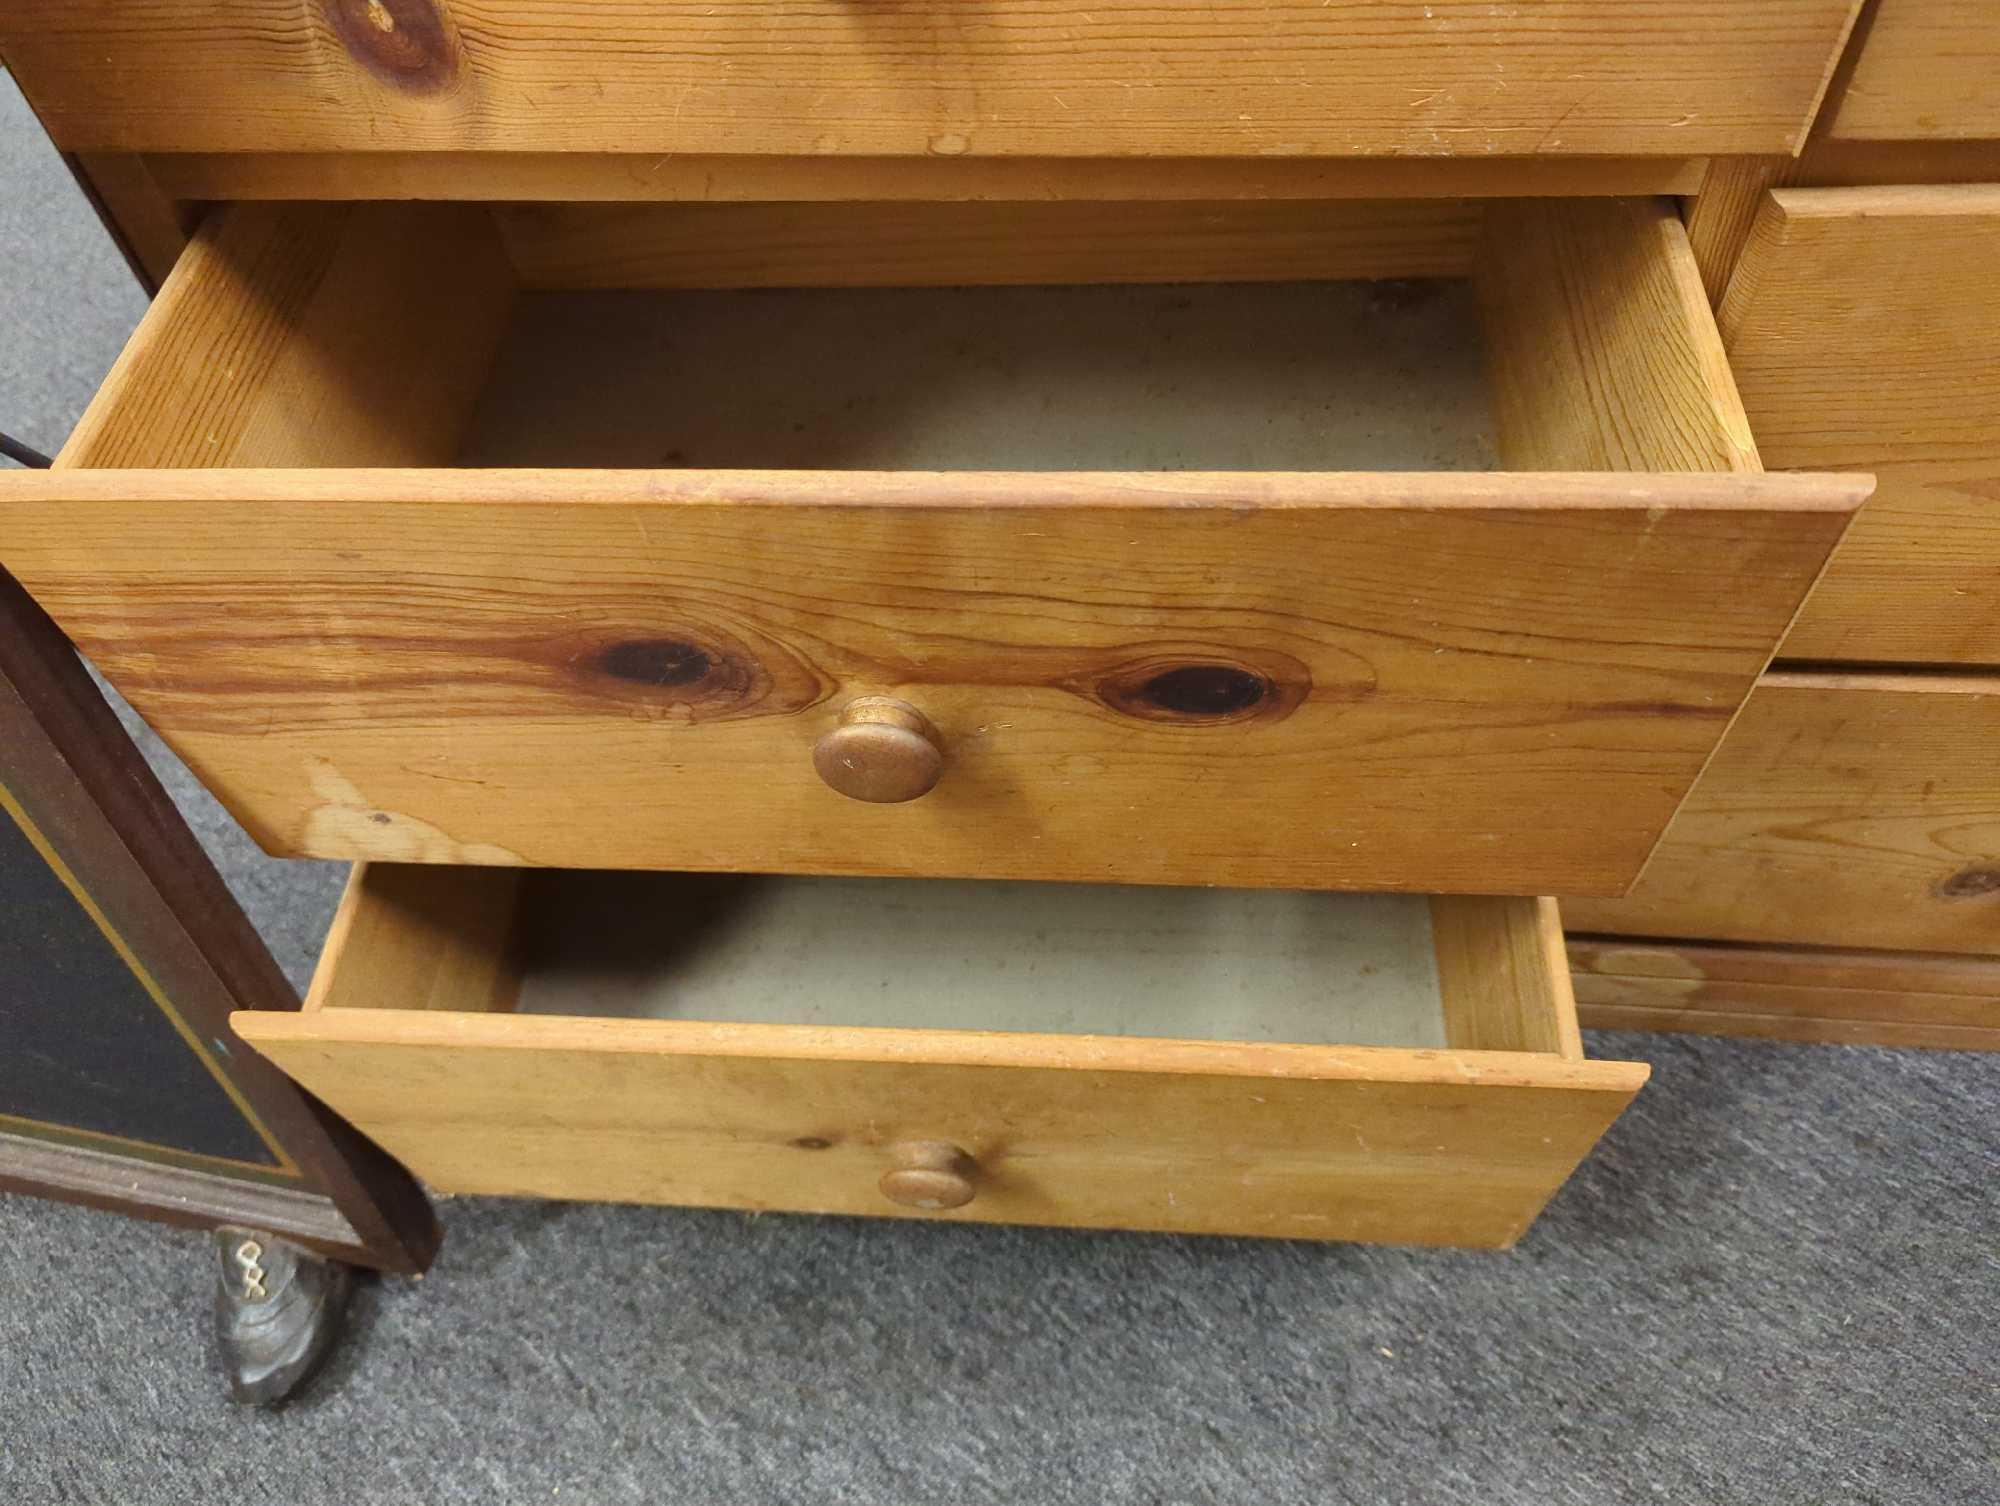 Pine Wood 9 Drawer Dresser One Drawer Wont Open, Measure Approximately 40 in x 13.5 in x 33 in, What